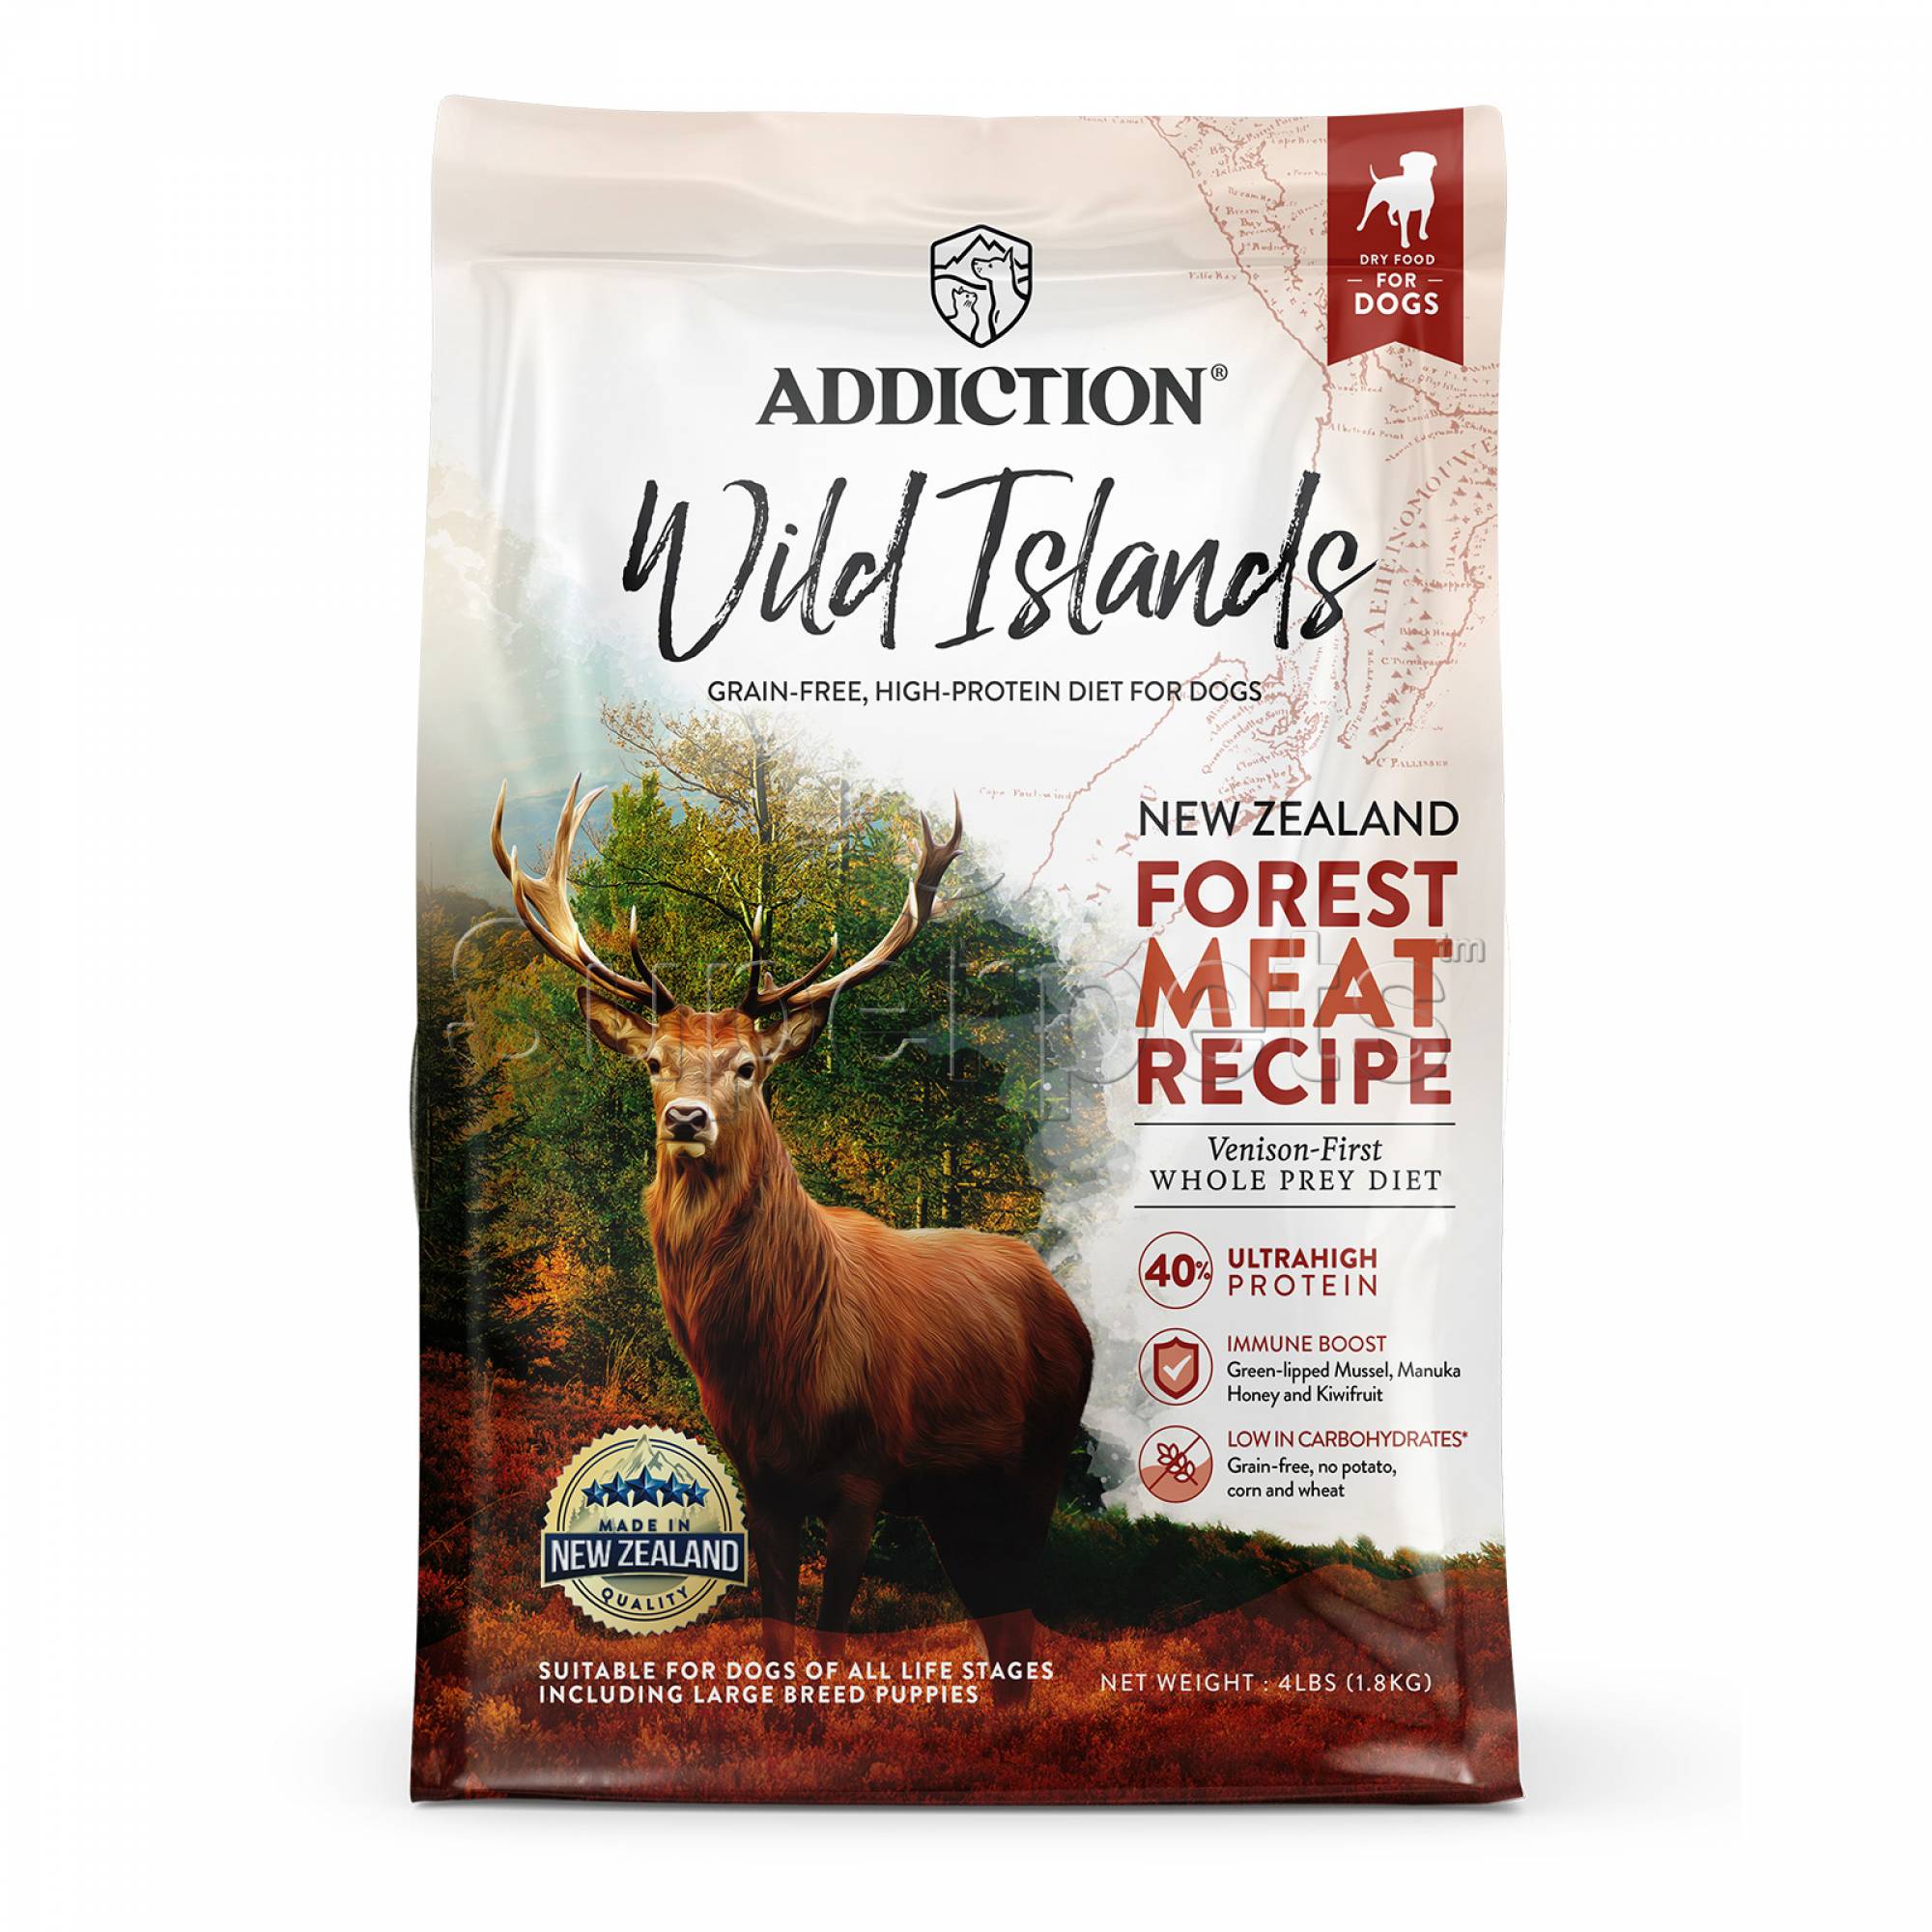 Addiction Wild Islands NZ Forest Meat Recipe Venison-First Dry Dog Food (4lb) (79205)